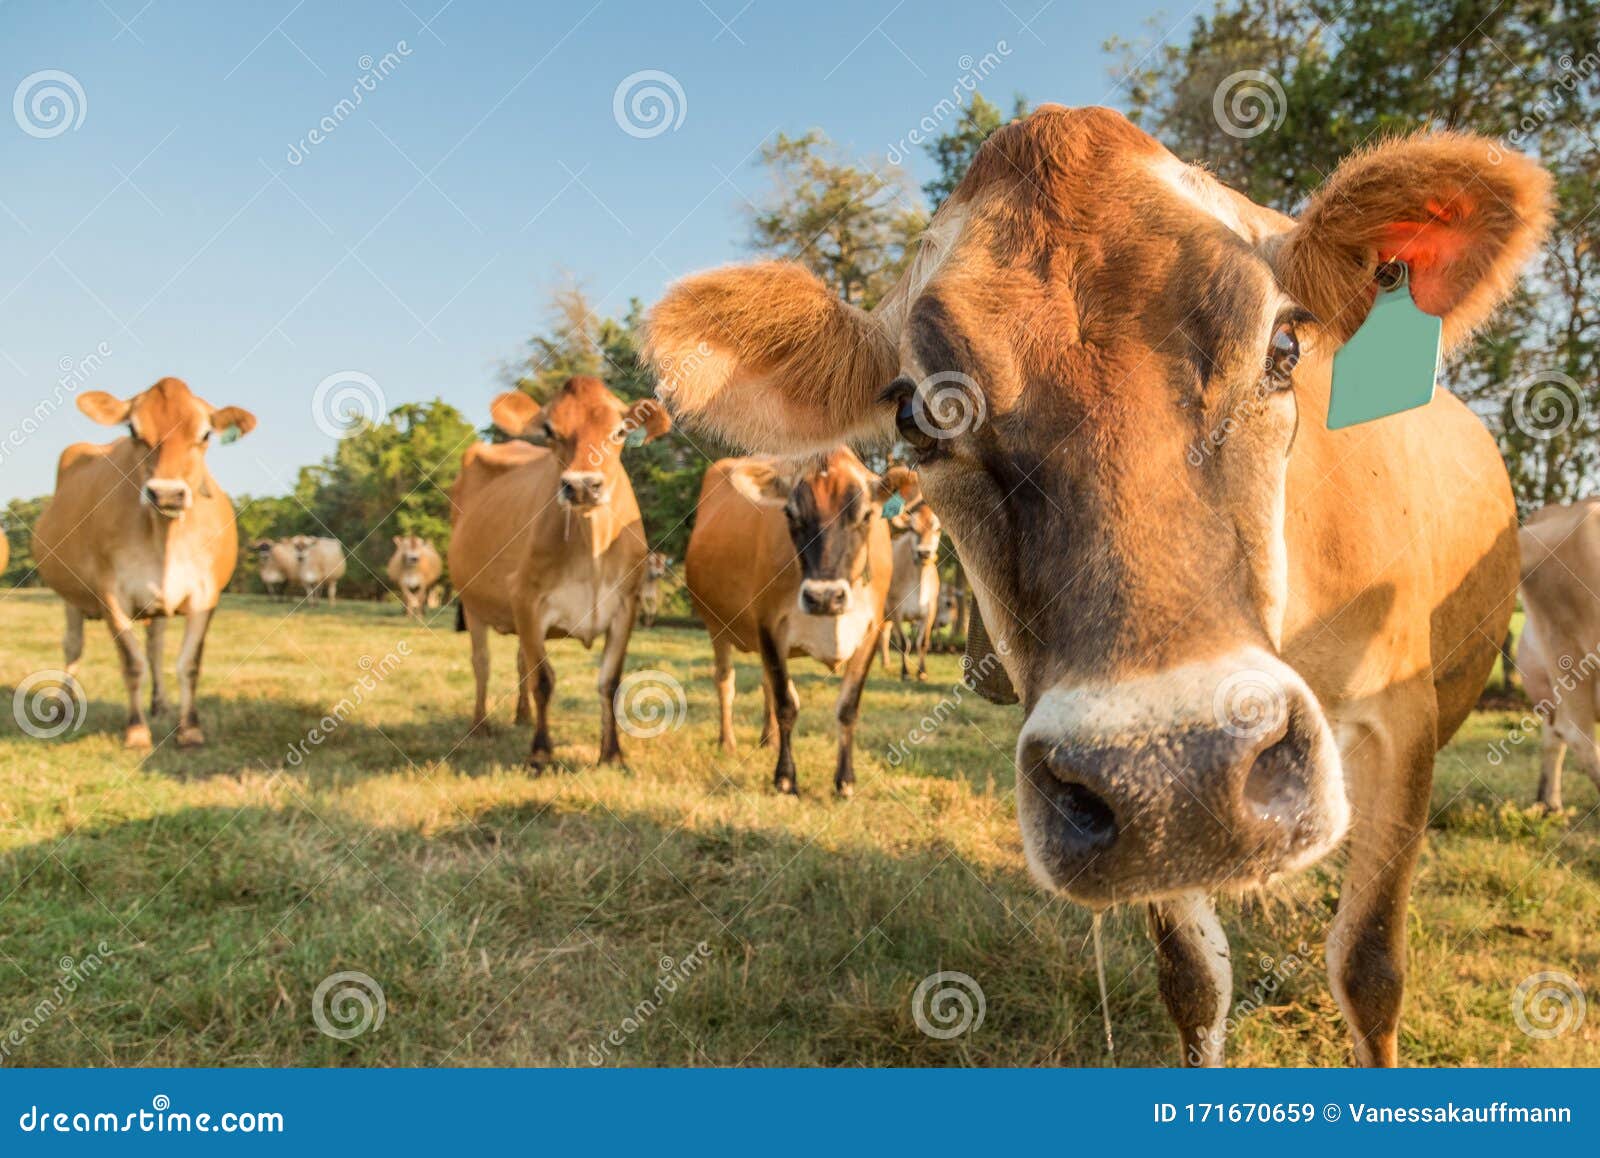 Curious Jersey Cow stock image. Image of farms, milk - 171670659